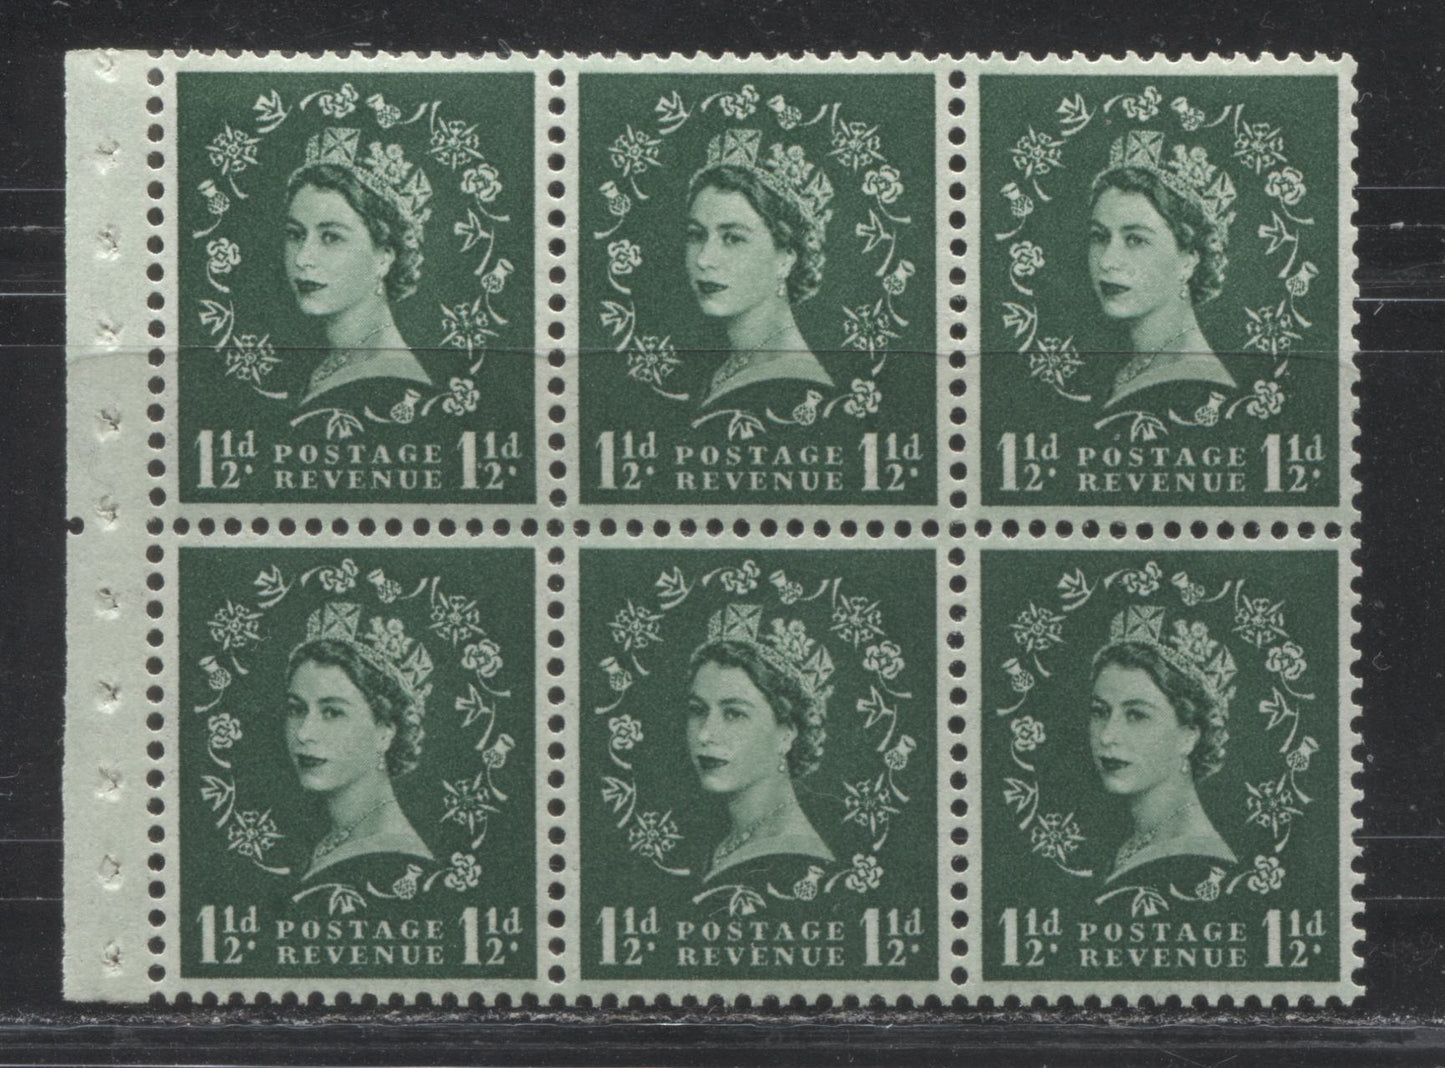 Great Britain SG#M13g 3/- Deep Red & Black Cover 1959 Wilding Graphite Issue, A Complete Counter Booklet With Inverted Multiple St. Edward's Crown Watermark, Panes of 6, Type B GPO Cypher, August 1959